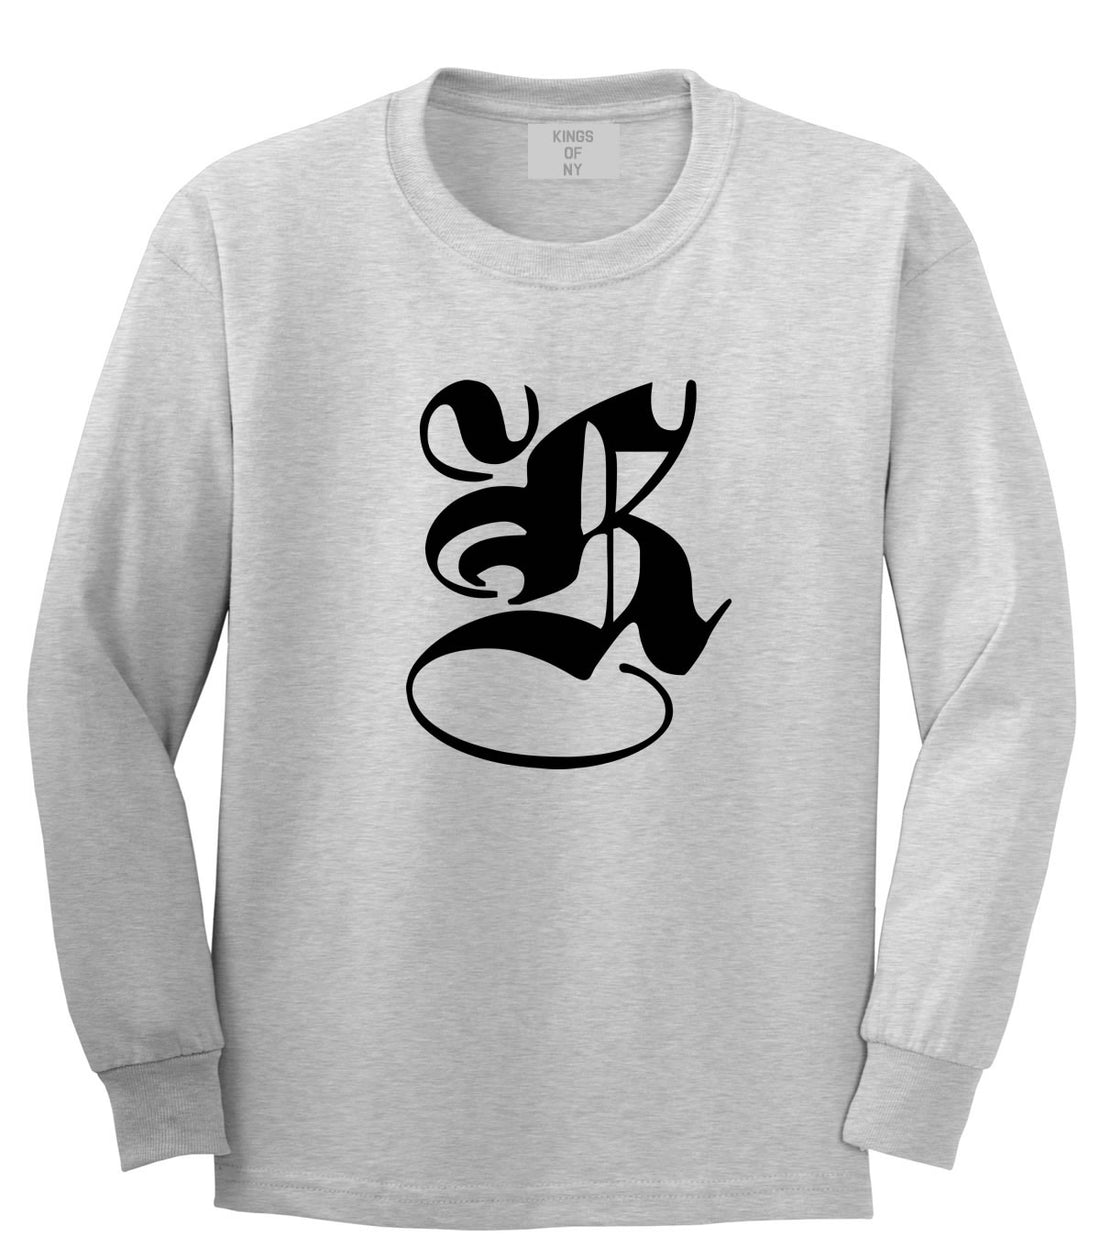 Kings Of NY K Gothic Style Long Sleeve T-Shirt in Grey